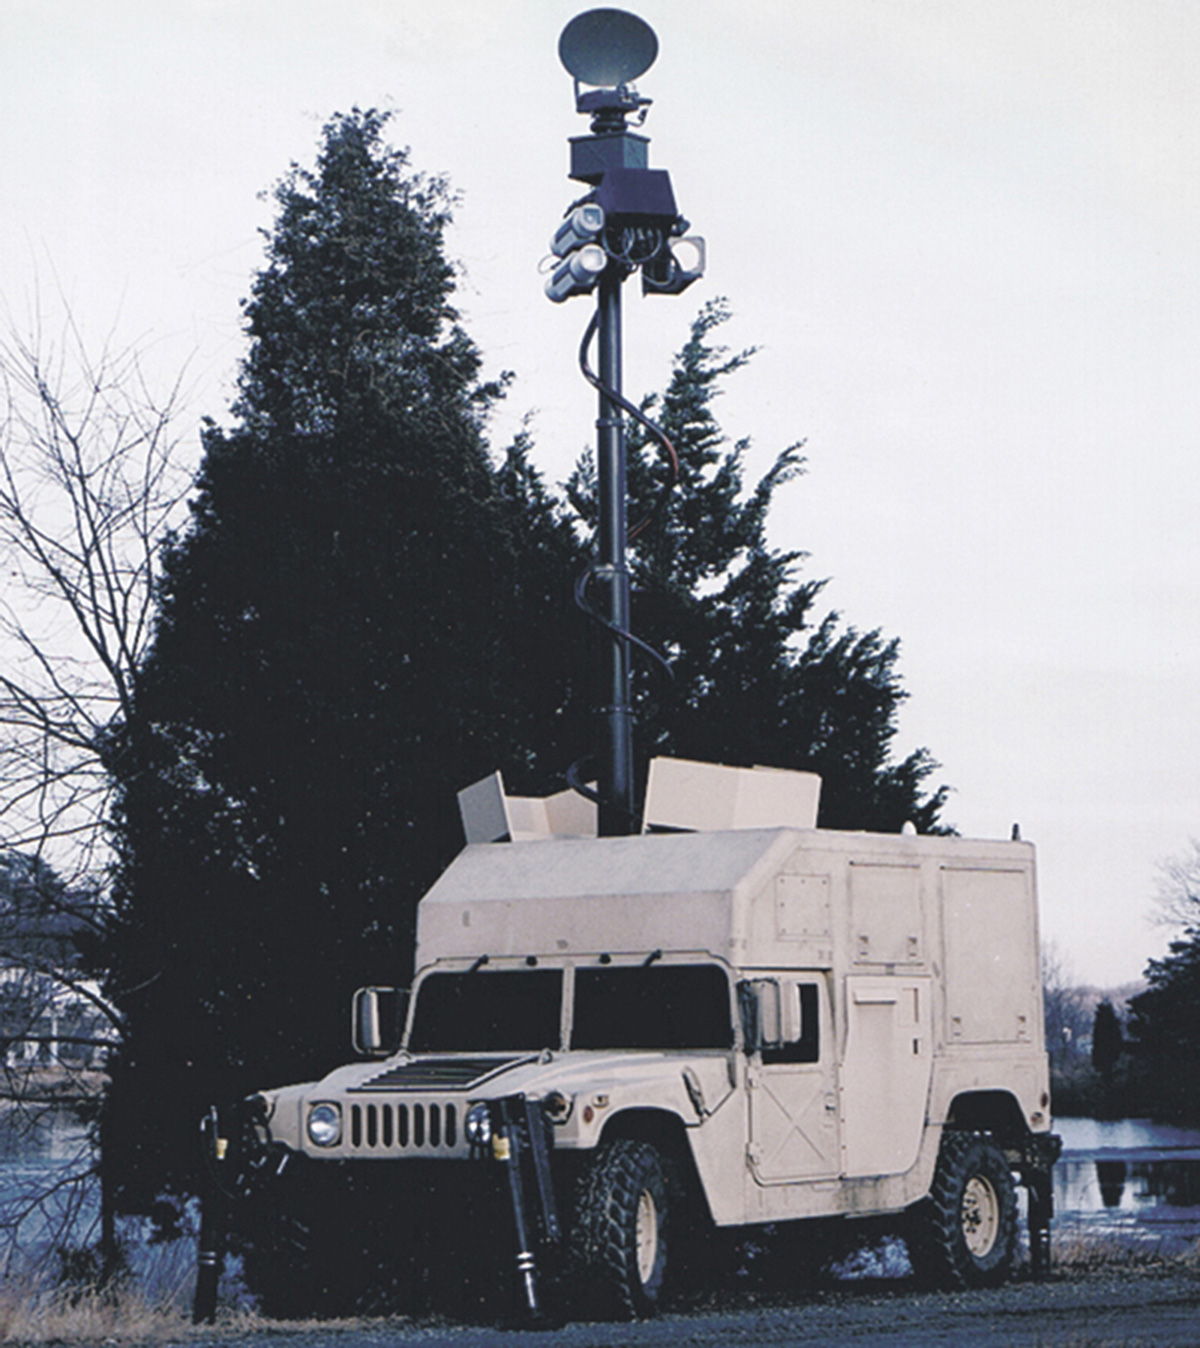 A photograph of a Magic Warrior/Nightstalker Humvee, imaging system deployed. 